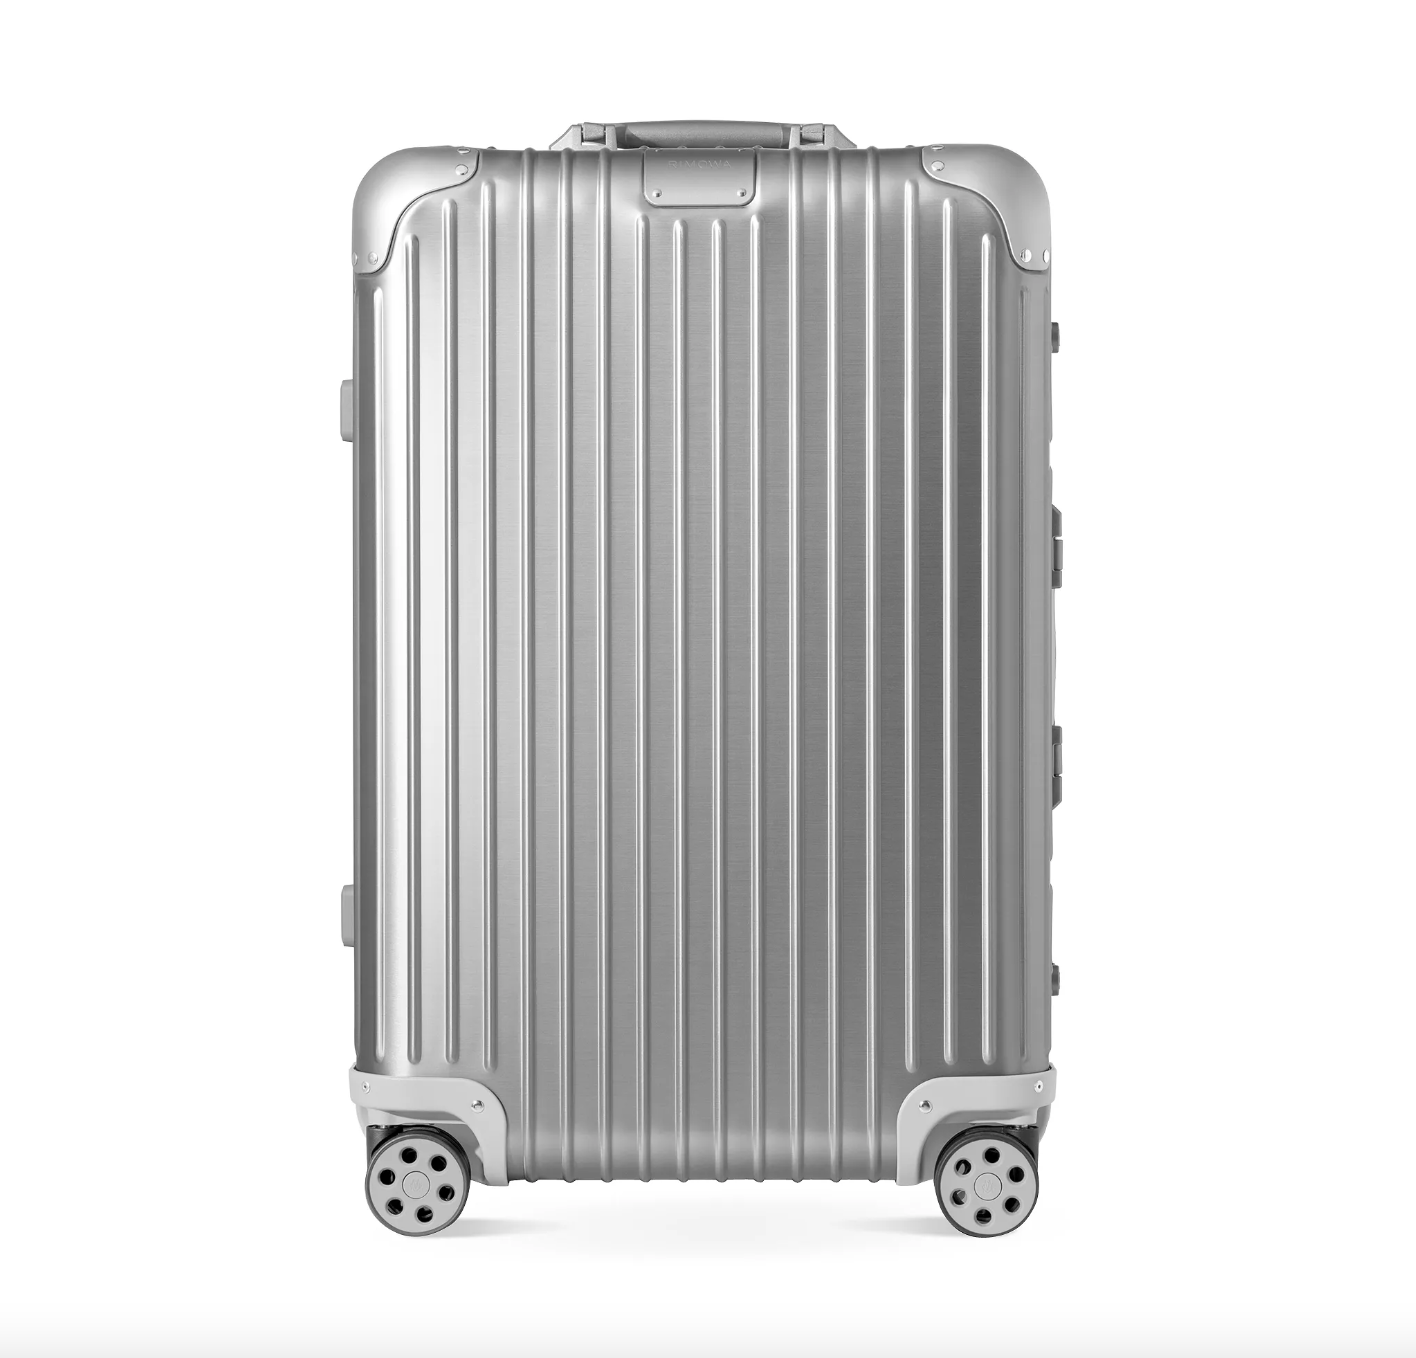 The Best Hard-Shell Luggage for Every Type of Traveler